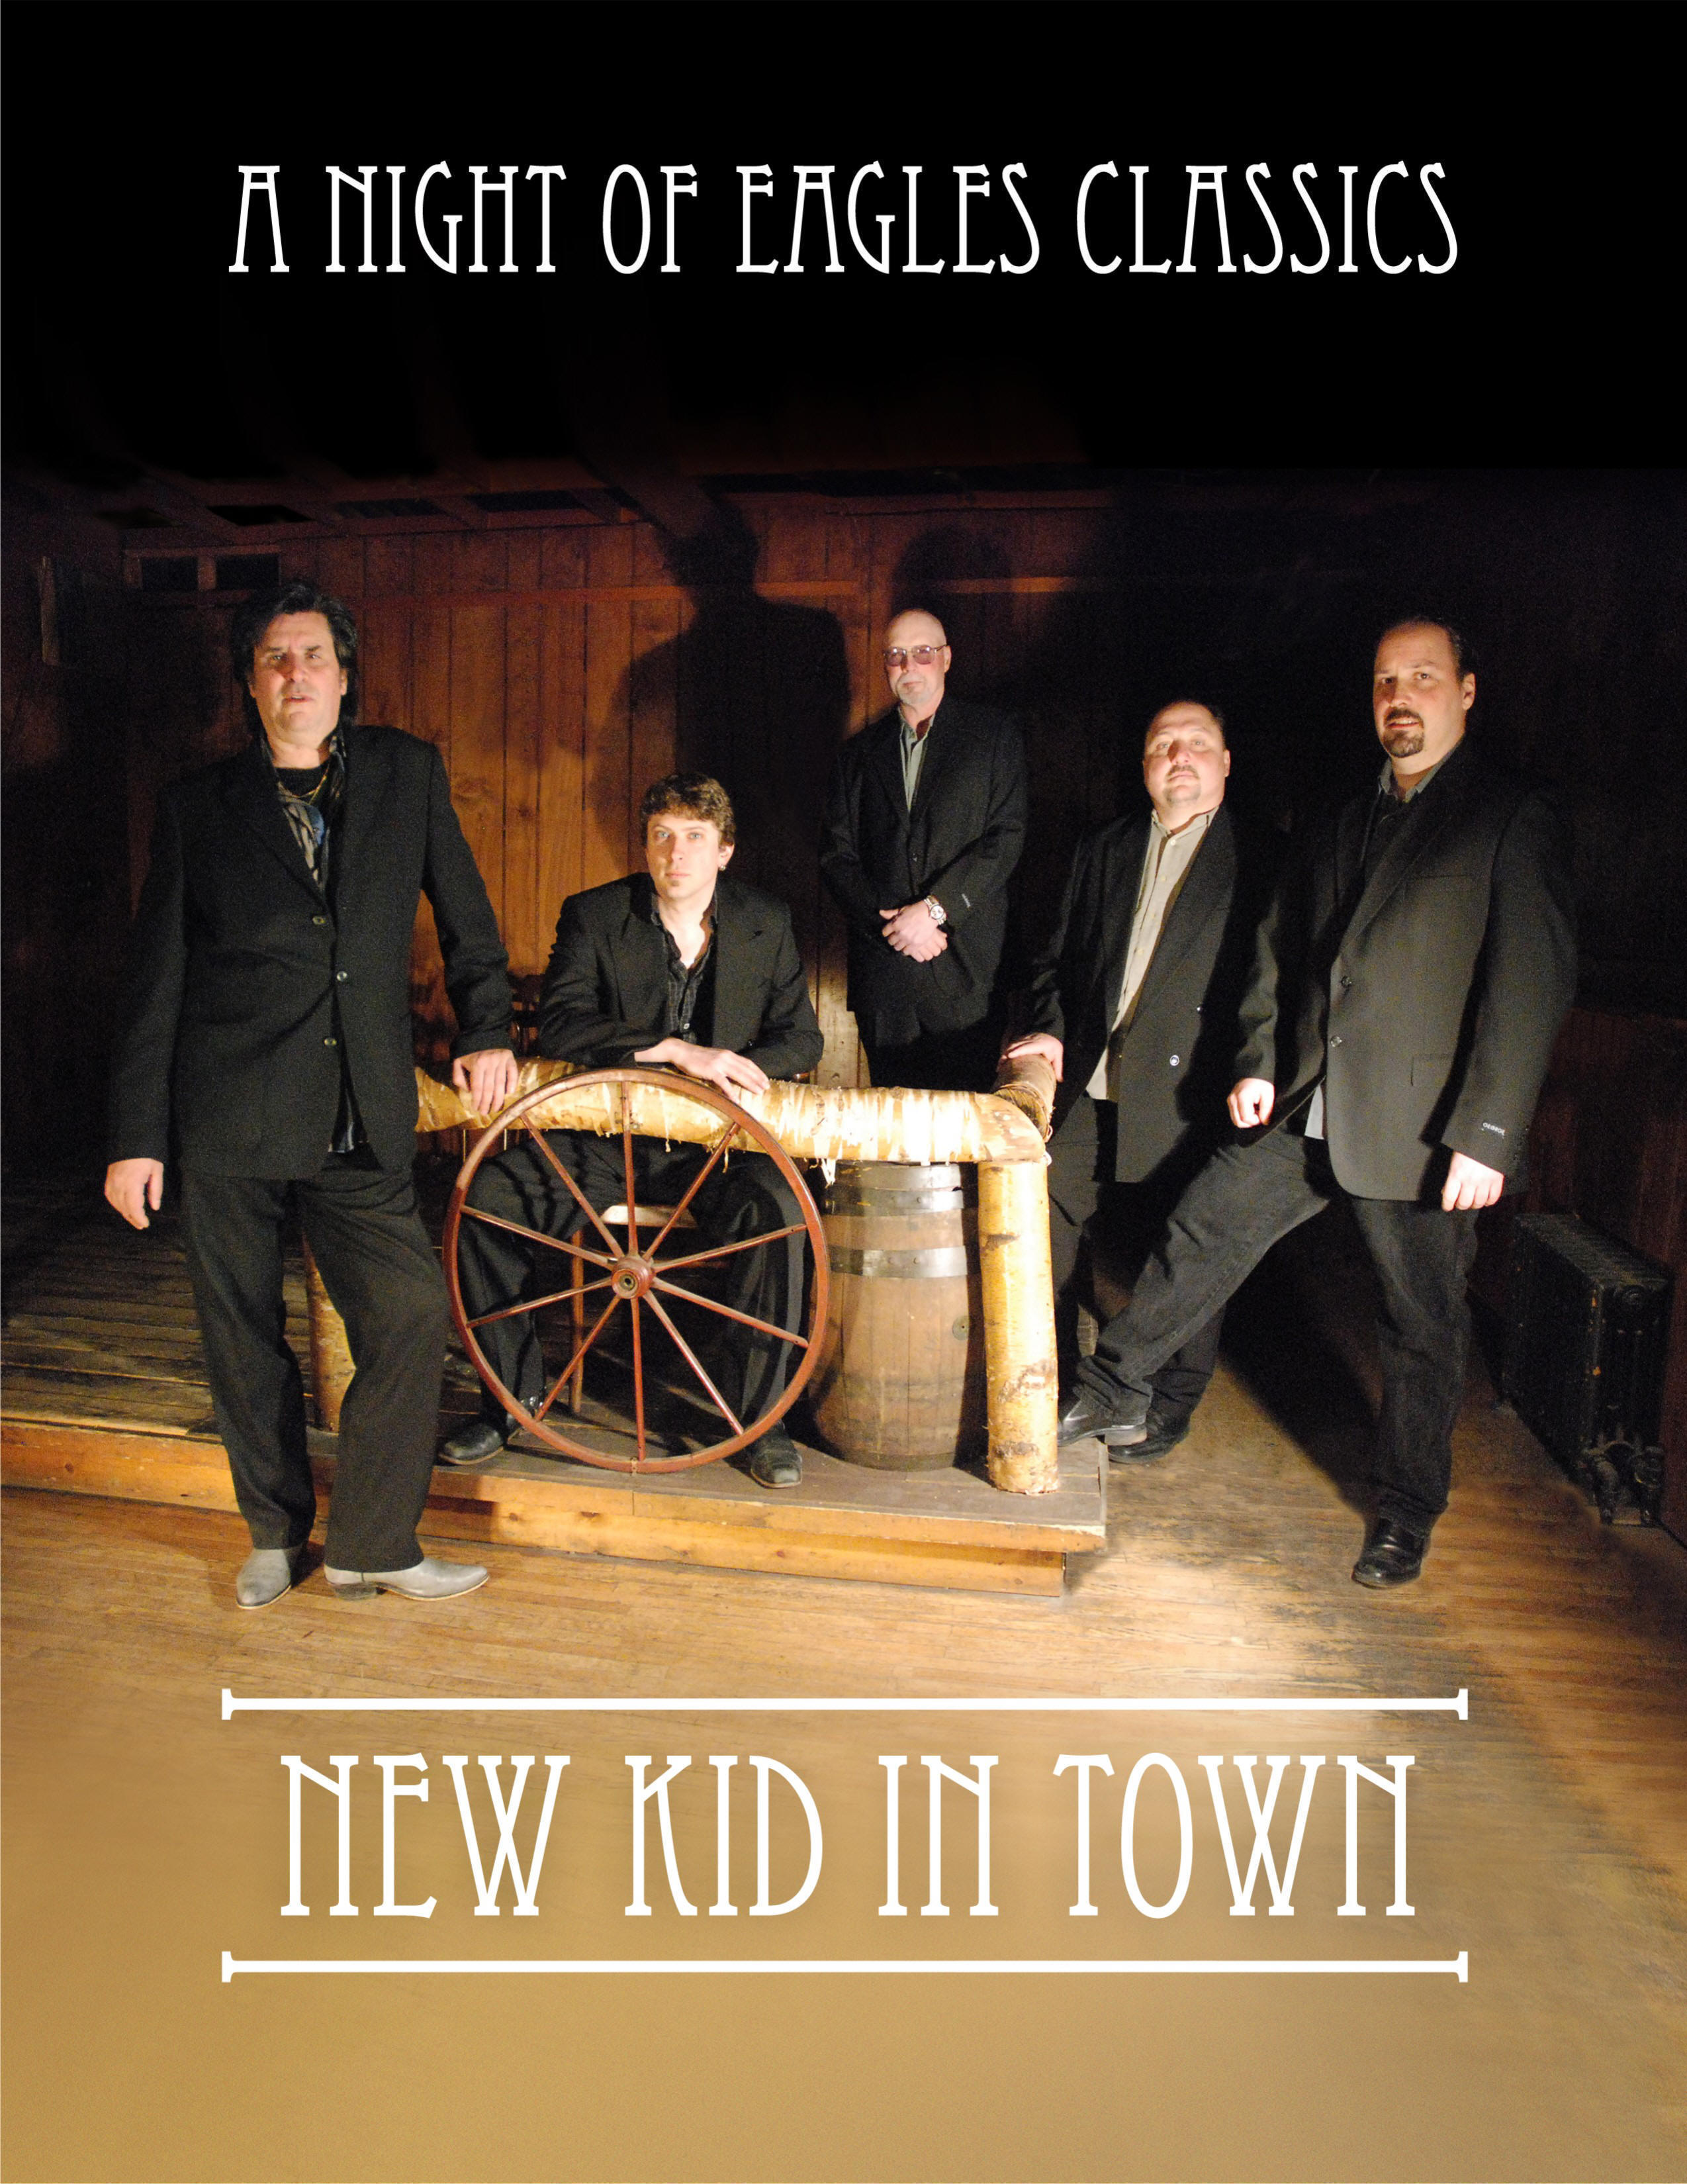 Eagles: New Kid In Town | Daly Live Music & Entertainment